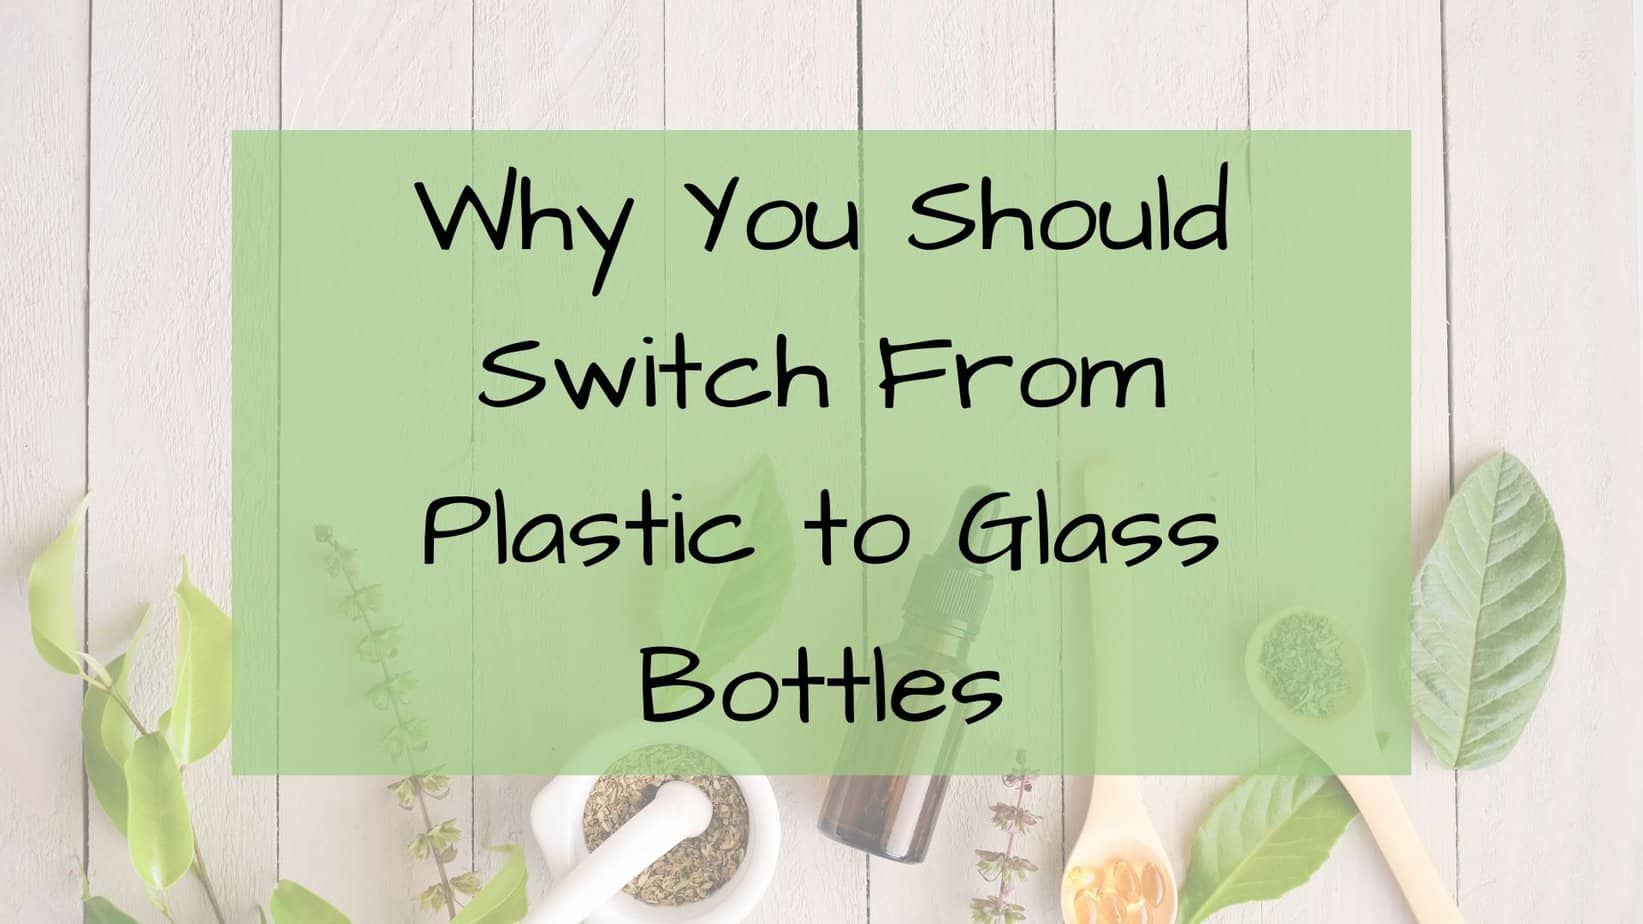 How To Clean And Sanitize Glass Bottles For Reuse (5 steps